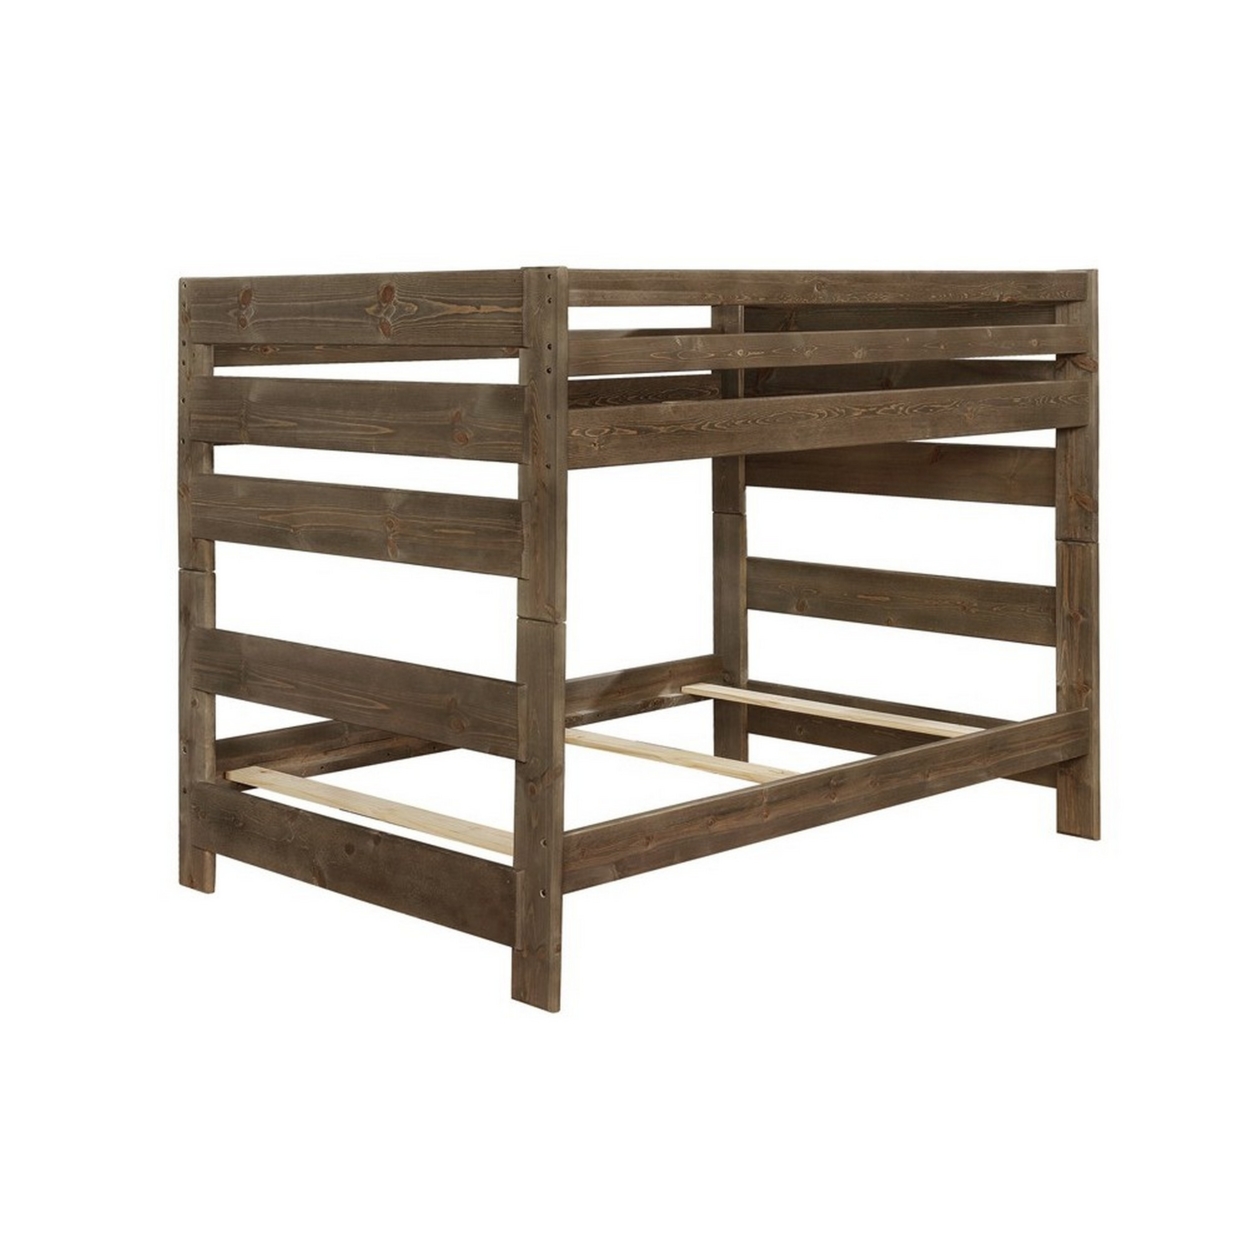 Transitional Style Wooden Full Over Full Bunk Bed With Guard Rails, Brown- Saltoro Sherpi